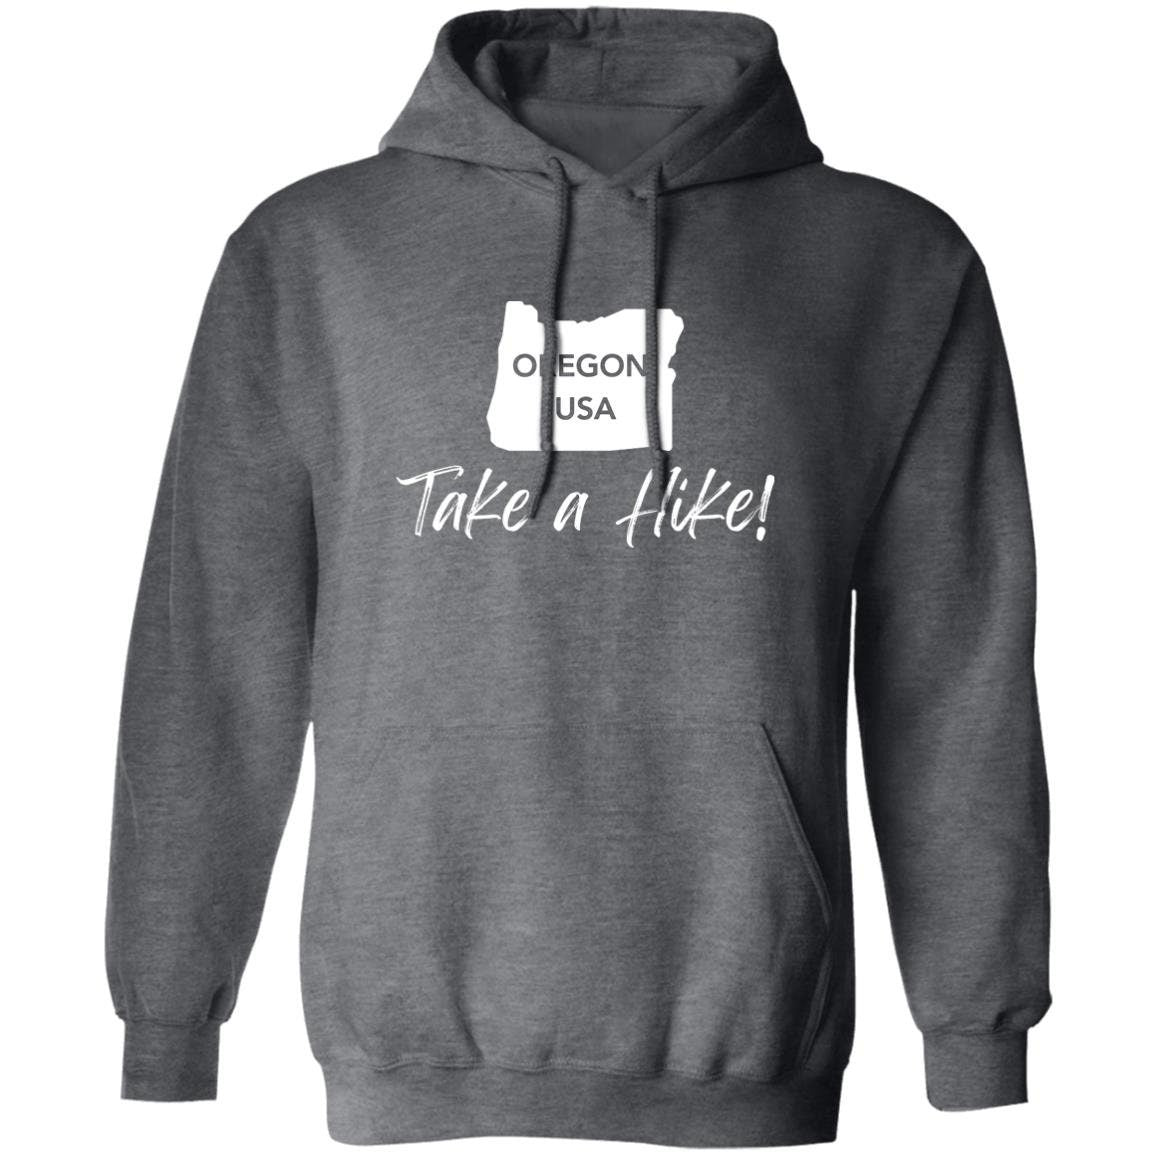 Comfy G185 Pullover Hoodie for men or women - Take a Hike Oregon white print